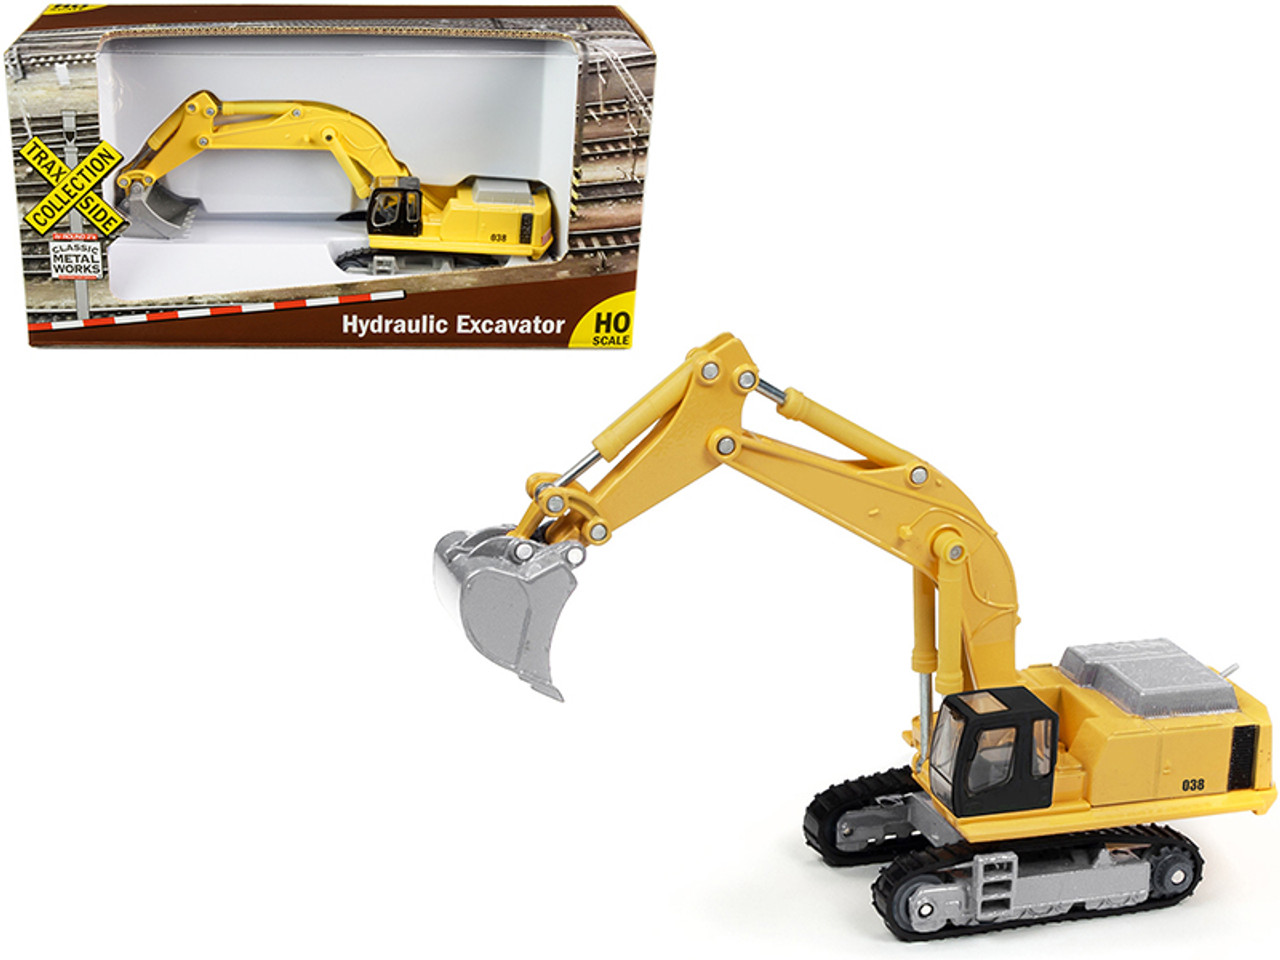 Hydraulic Excavator Yellow "TraxSide Collection" 1/87 (HO) Scale Diecast Model by Classic Metal Works